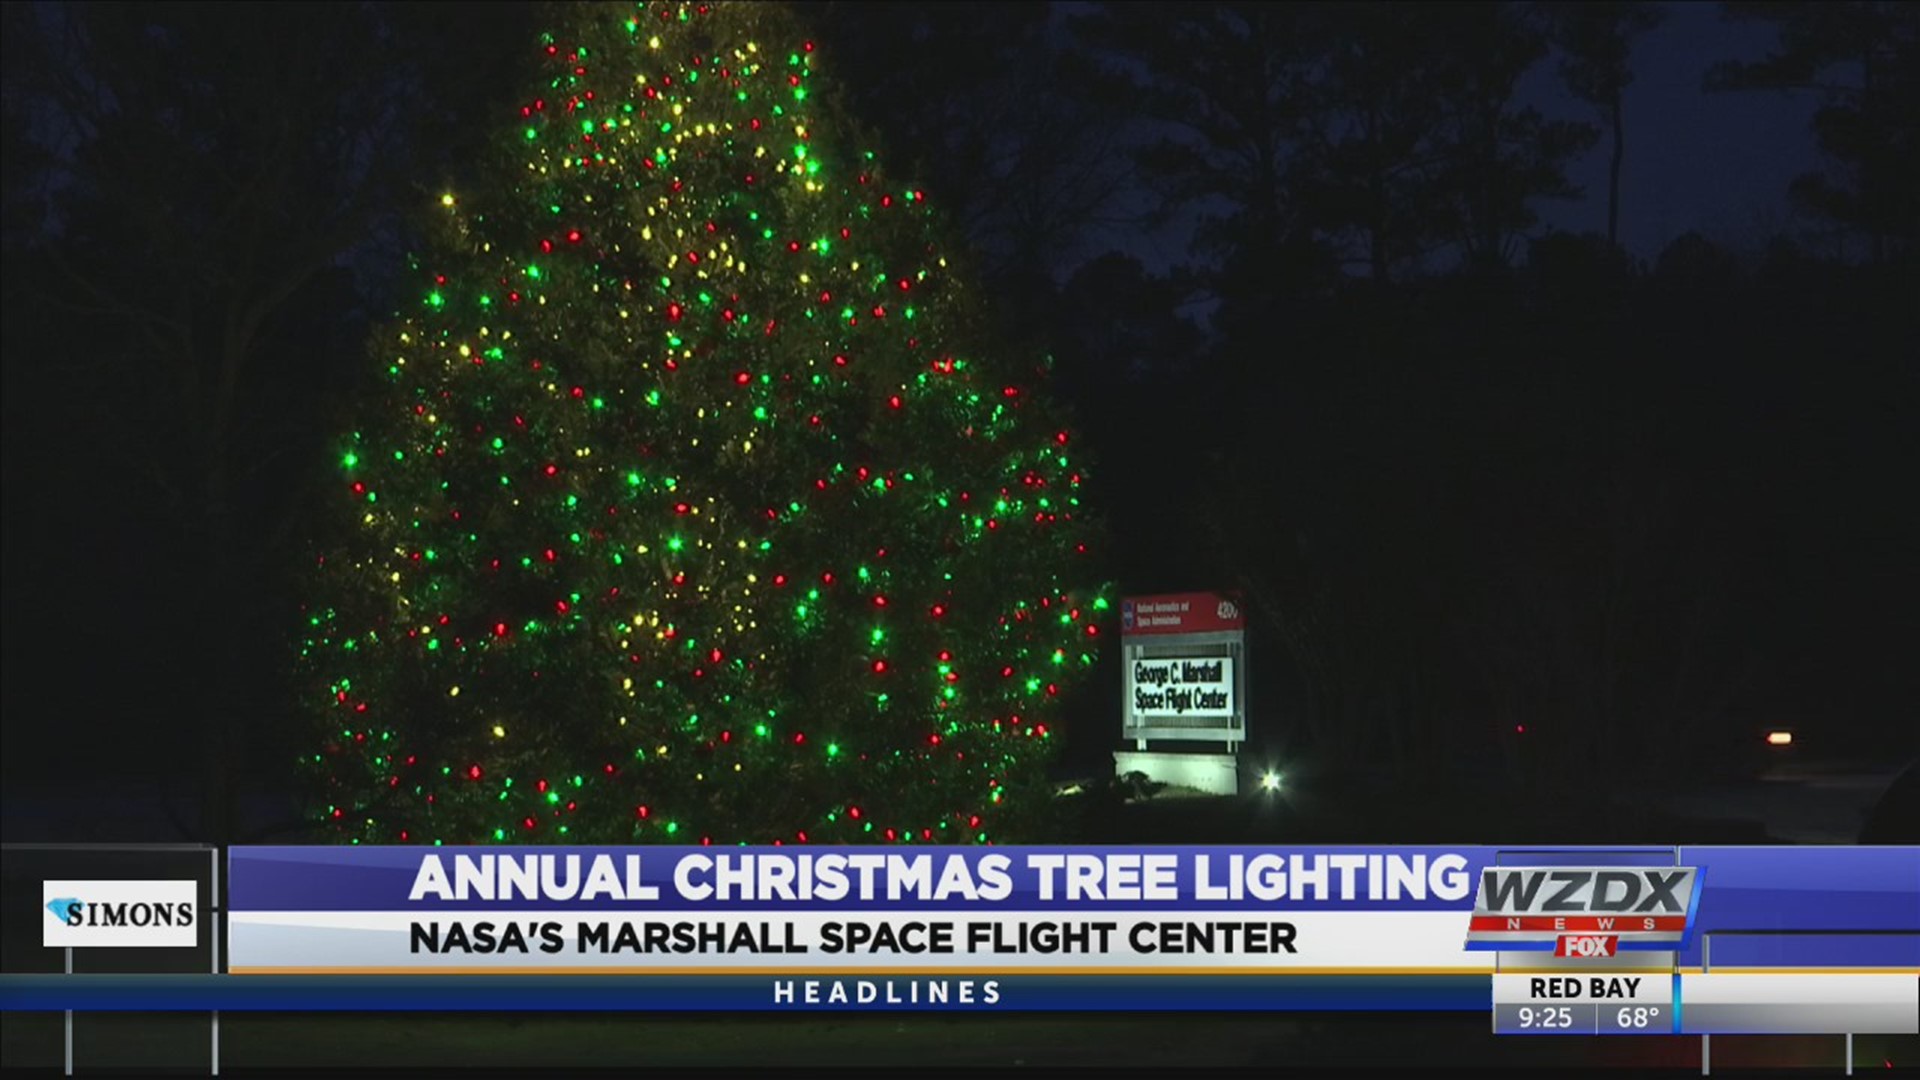 As NASA works to ignite Artemis-era engines of new lunar discovery, team members at NASA’s Marshall Space Flight Center in Huntsville, Alabama, gathered under a waxing Frost Moon for Marshall’s annual holiday tree lighting ceremony.